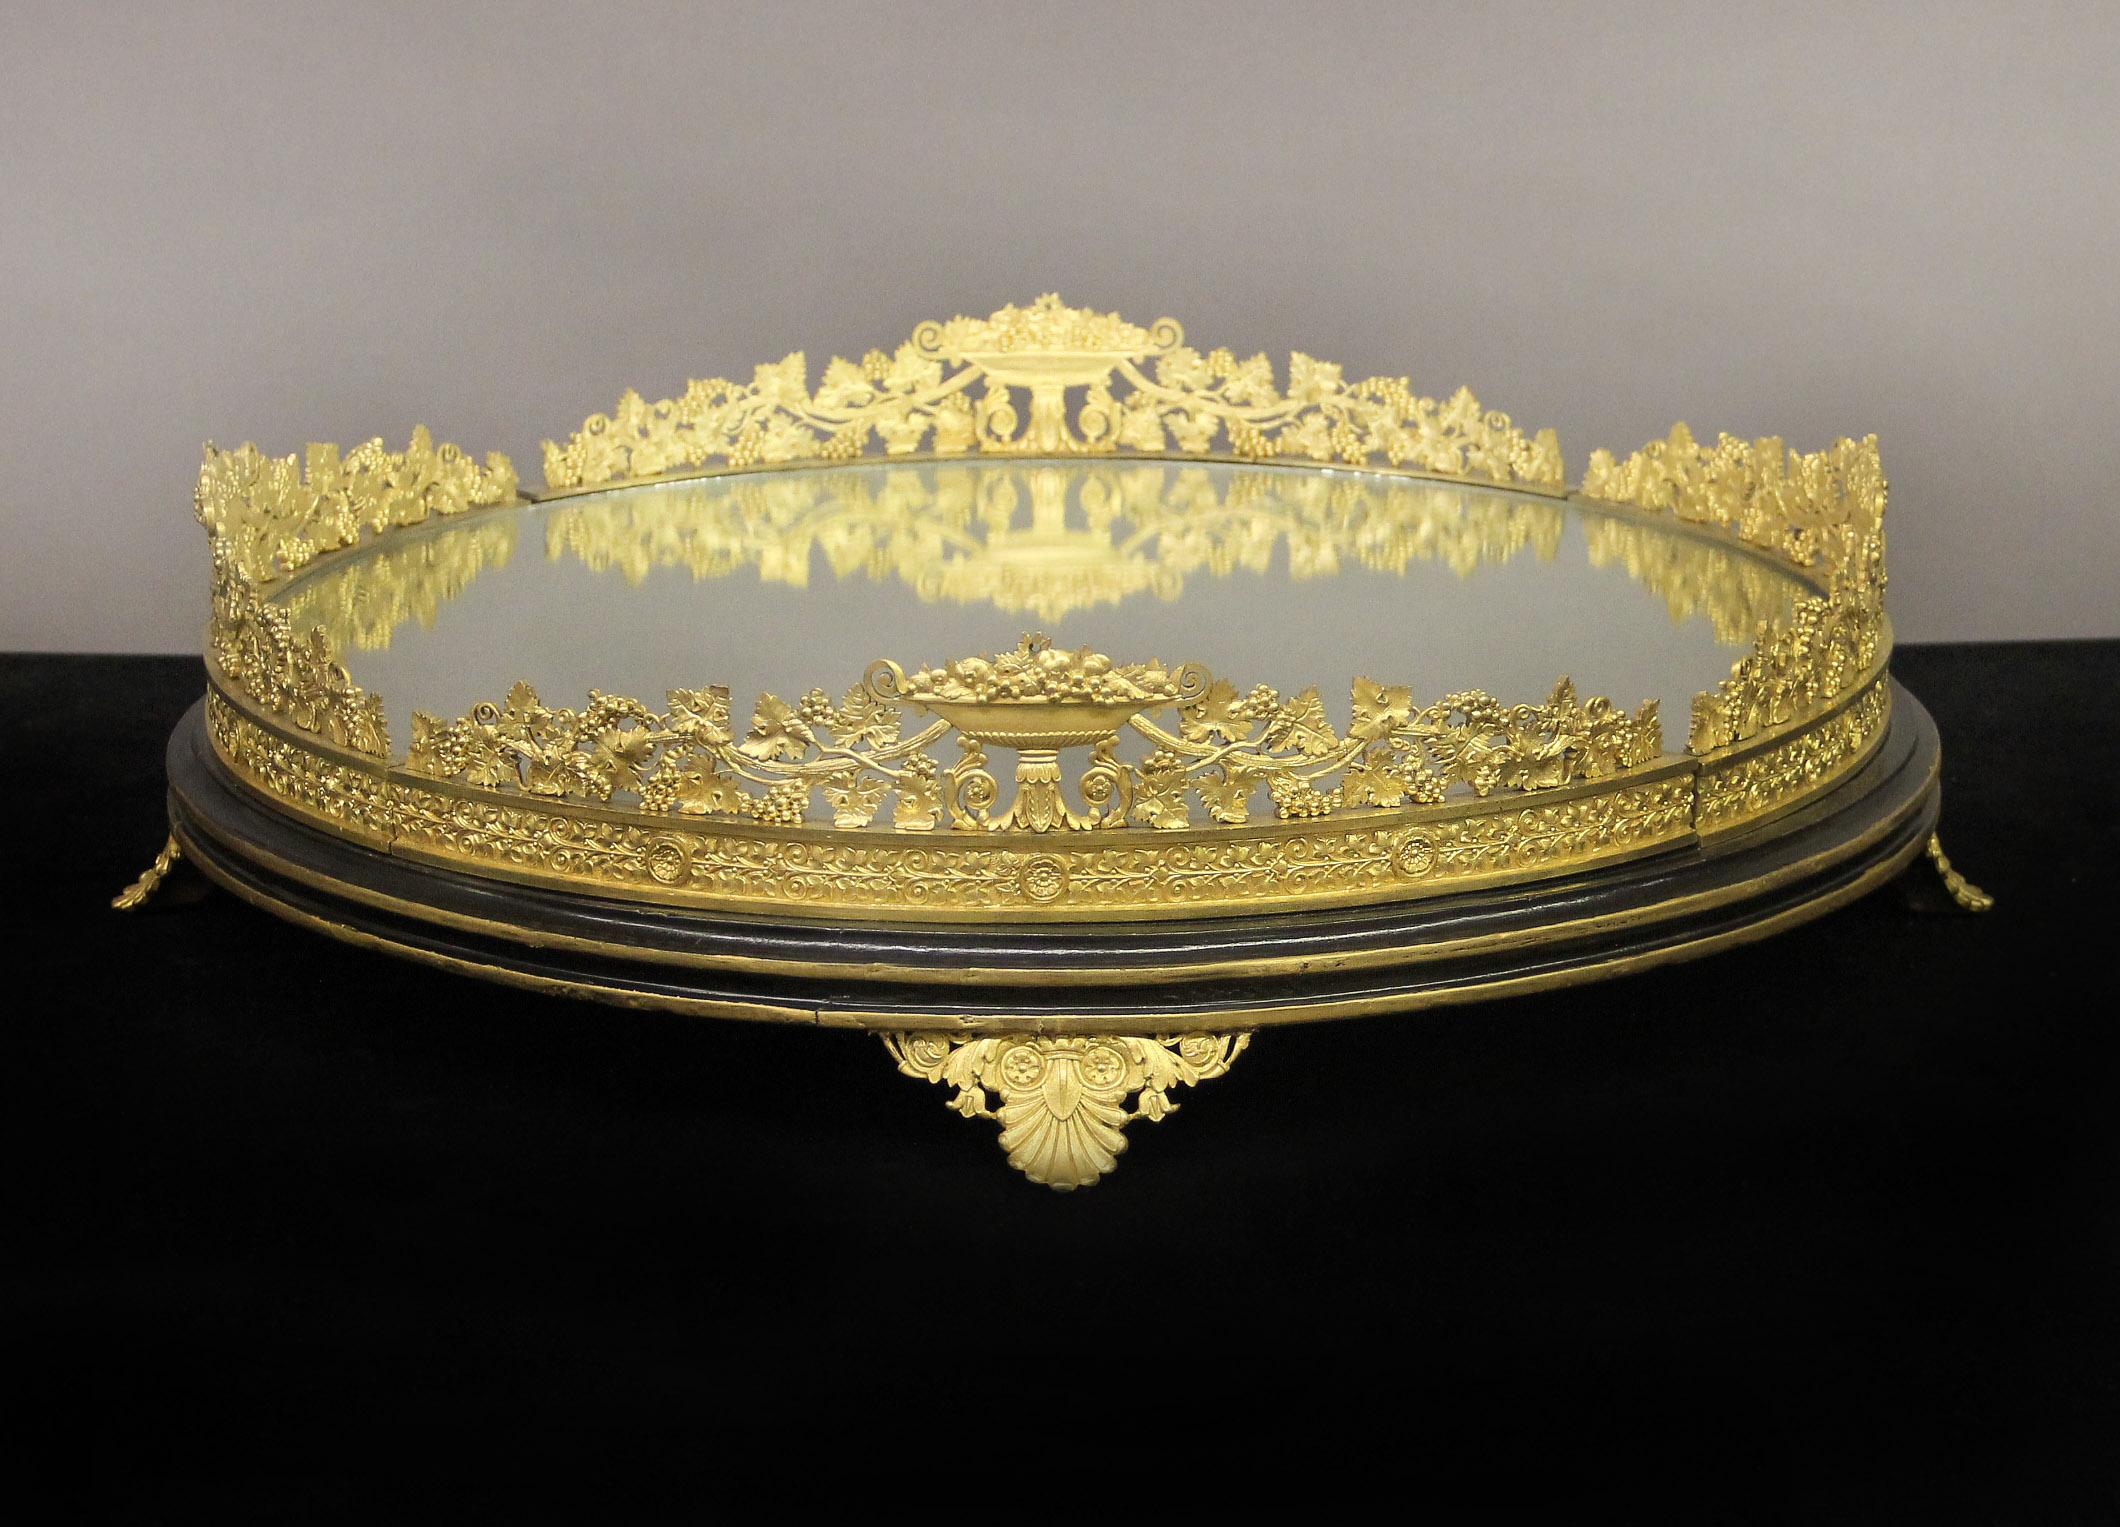 A Fantastic Late 19th Century Gilt Bronze and Mirror Surtout De Table

Circular form, cast with a grapevine bronze gallery and fruit filled centerpieces, a fitted mirror base and sitting on four shaped feet.

Surtouts de table began to appear